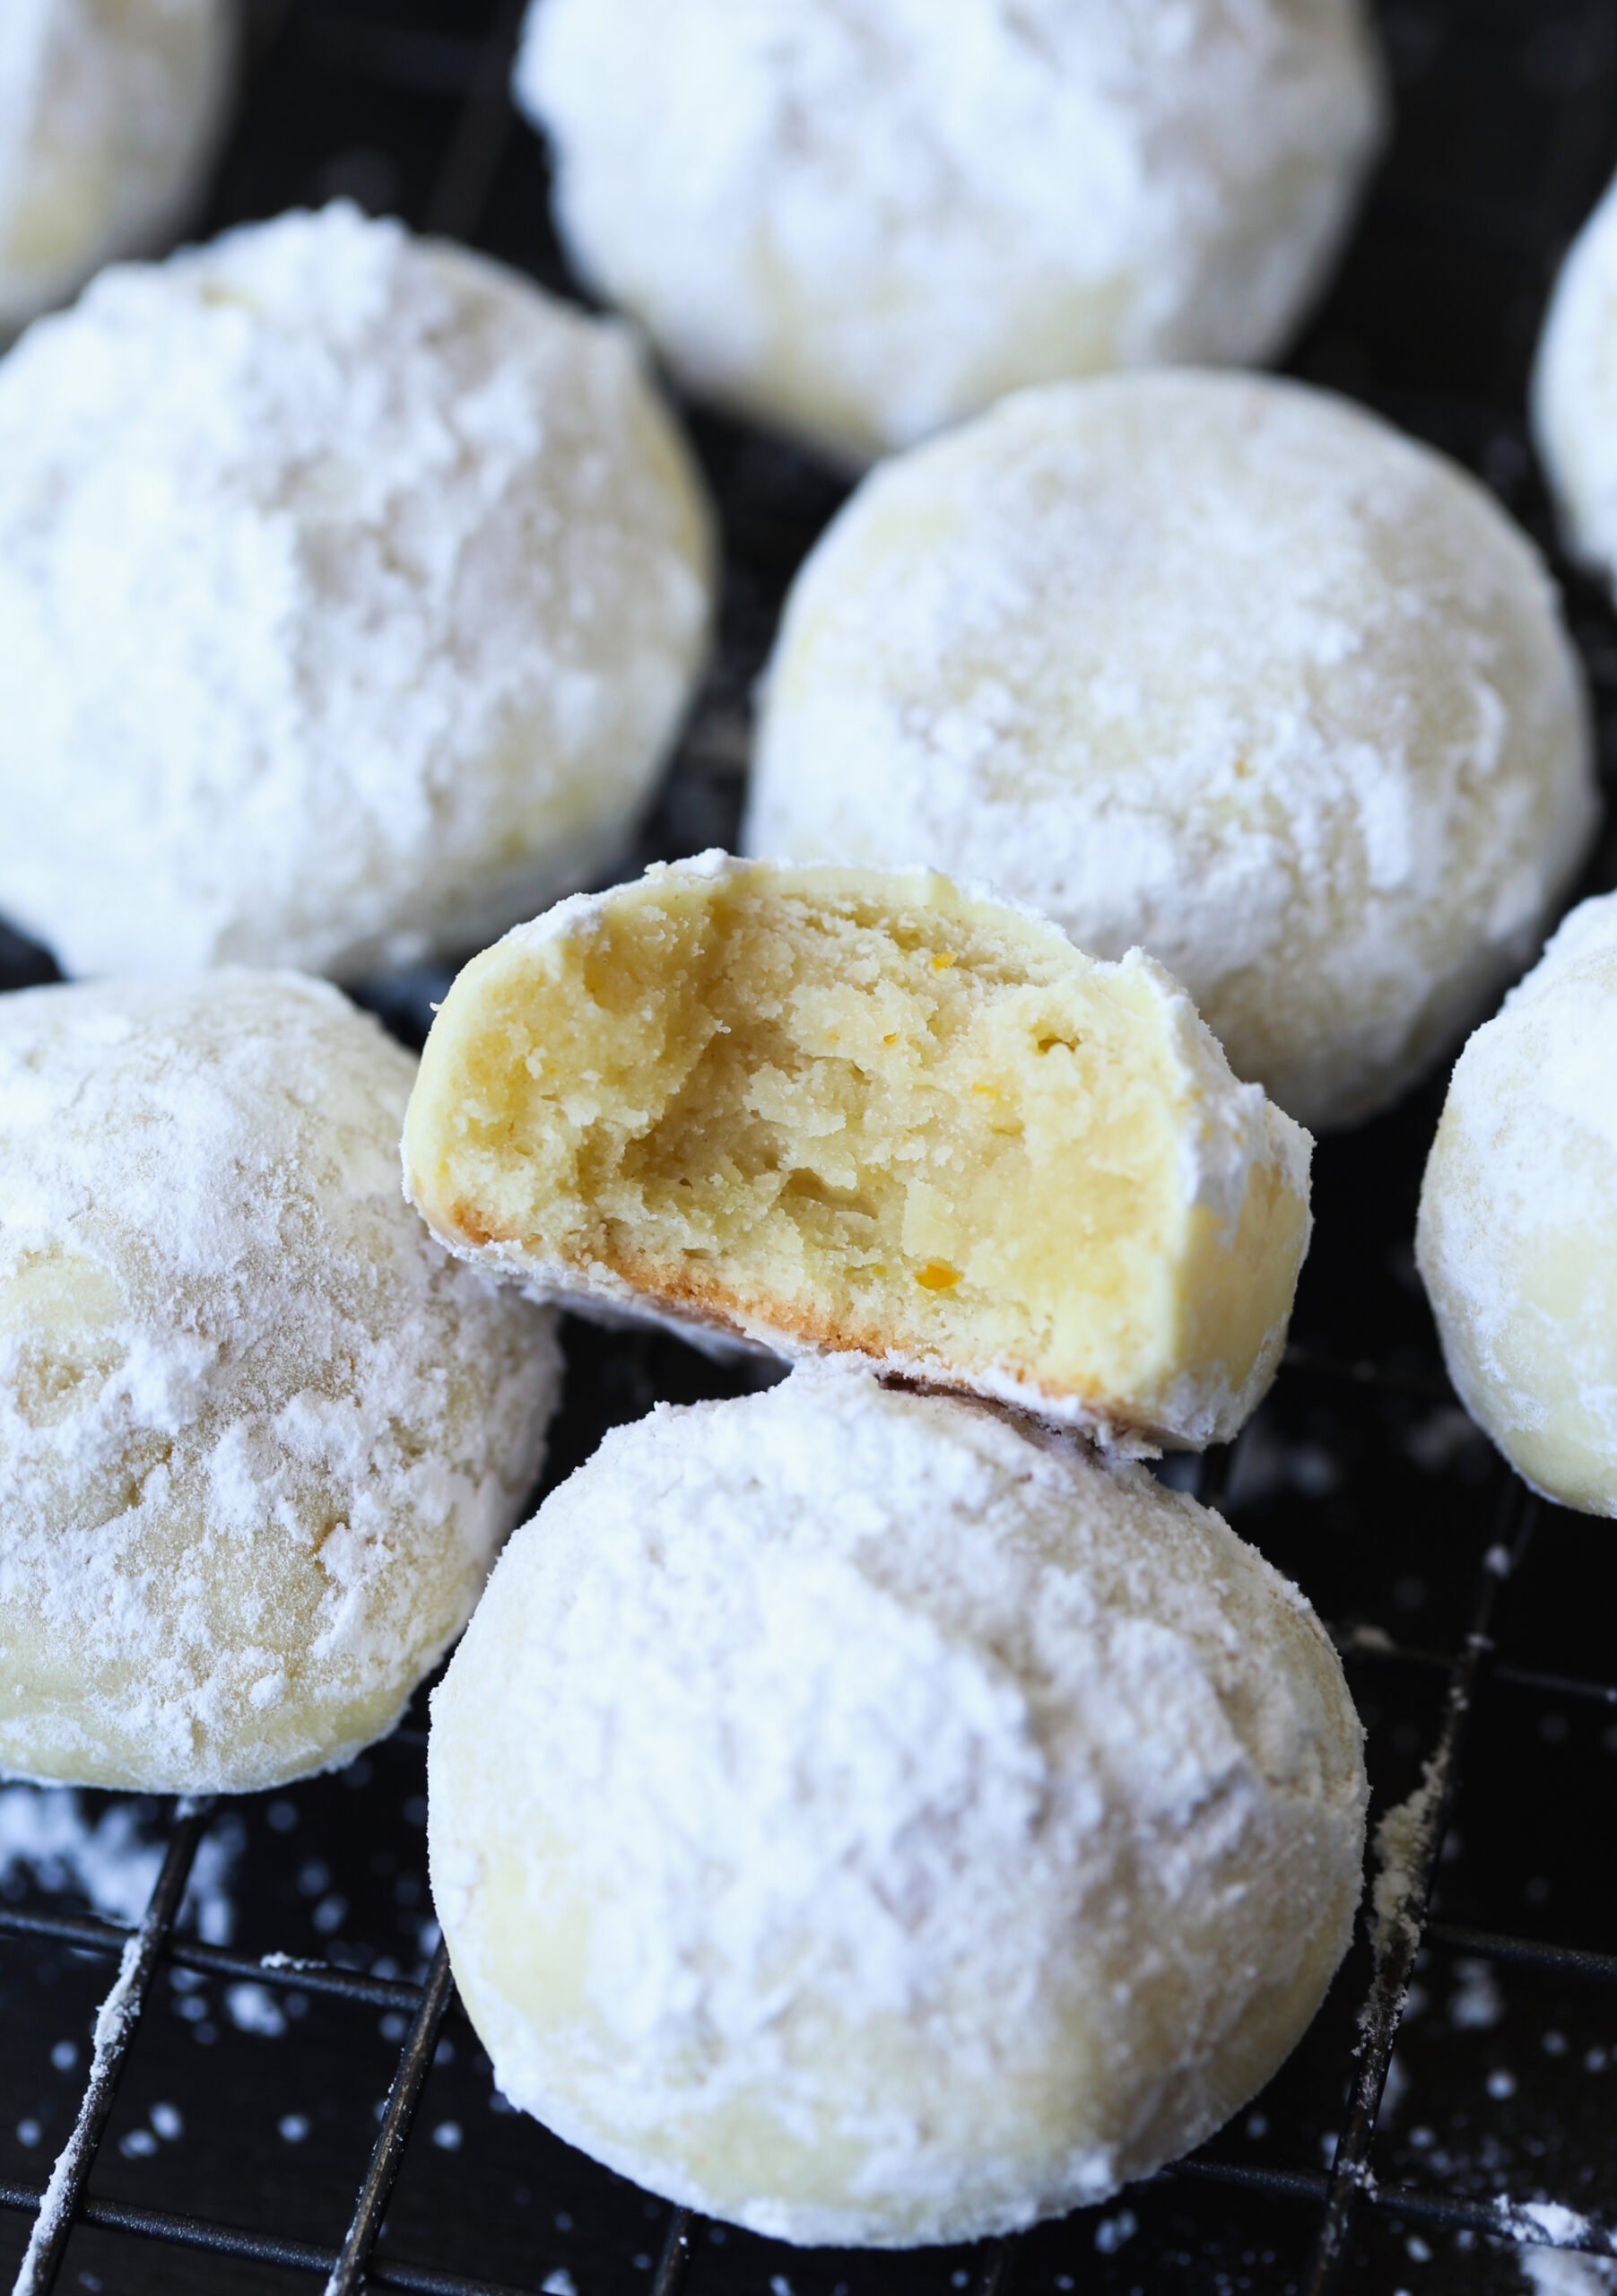 Orange Cookies dusted with powdered sugar